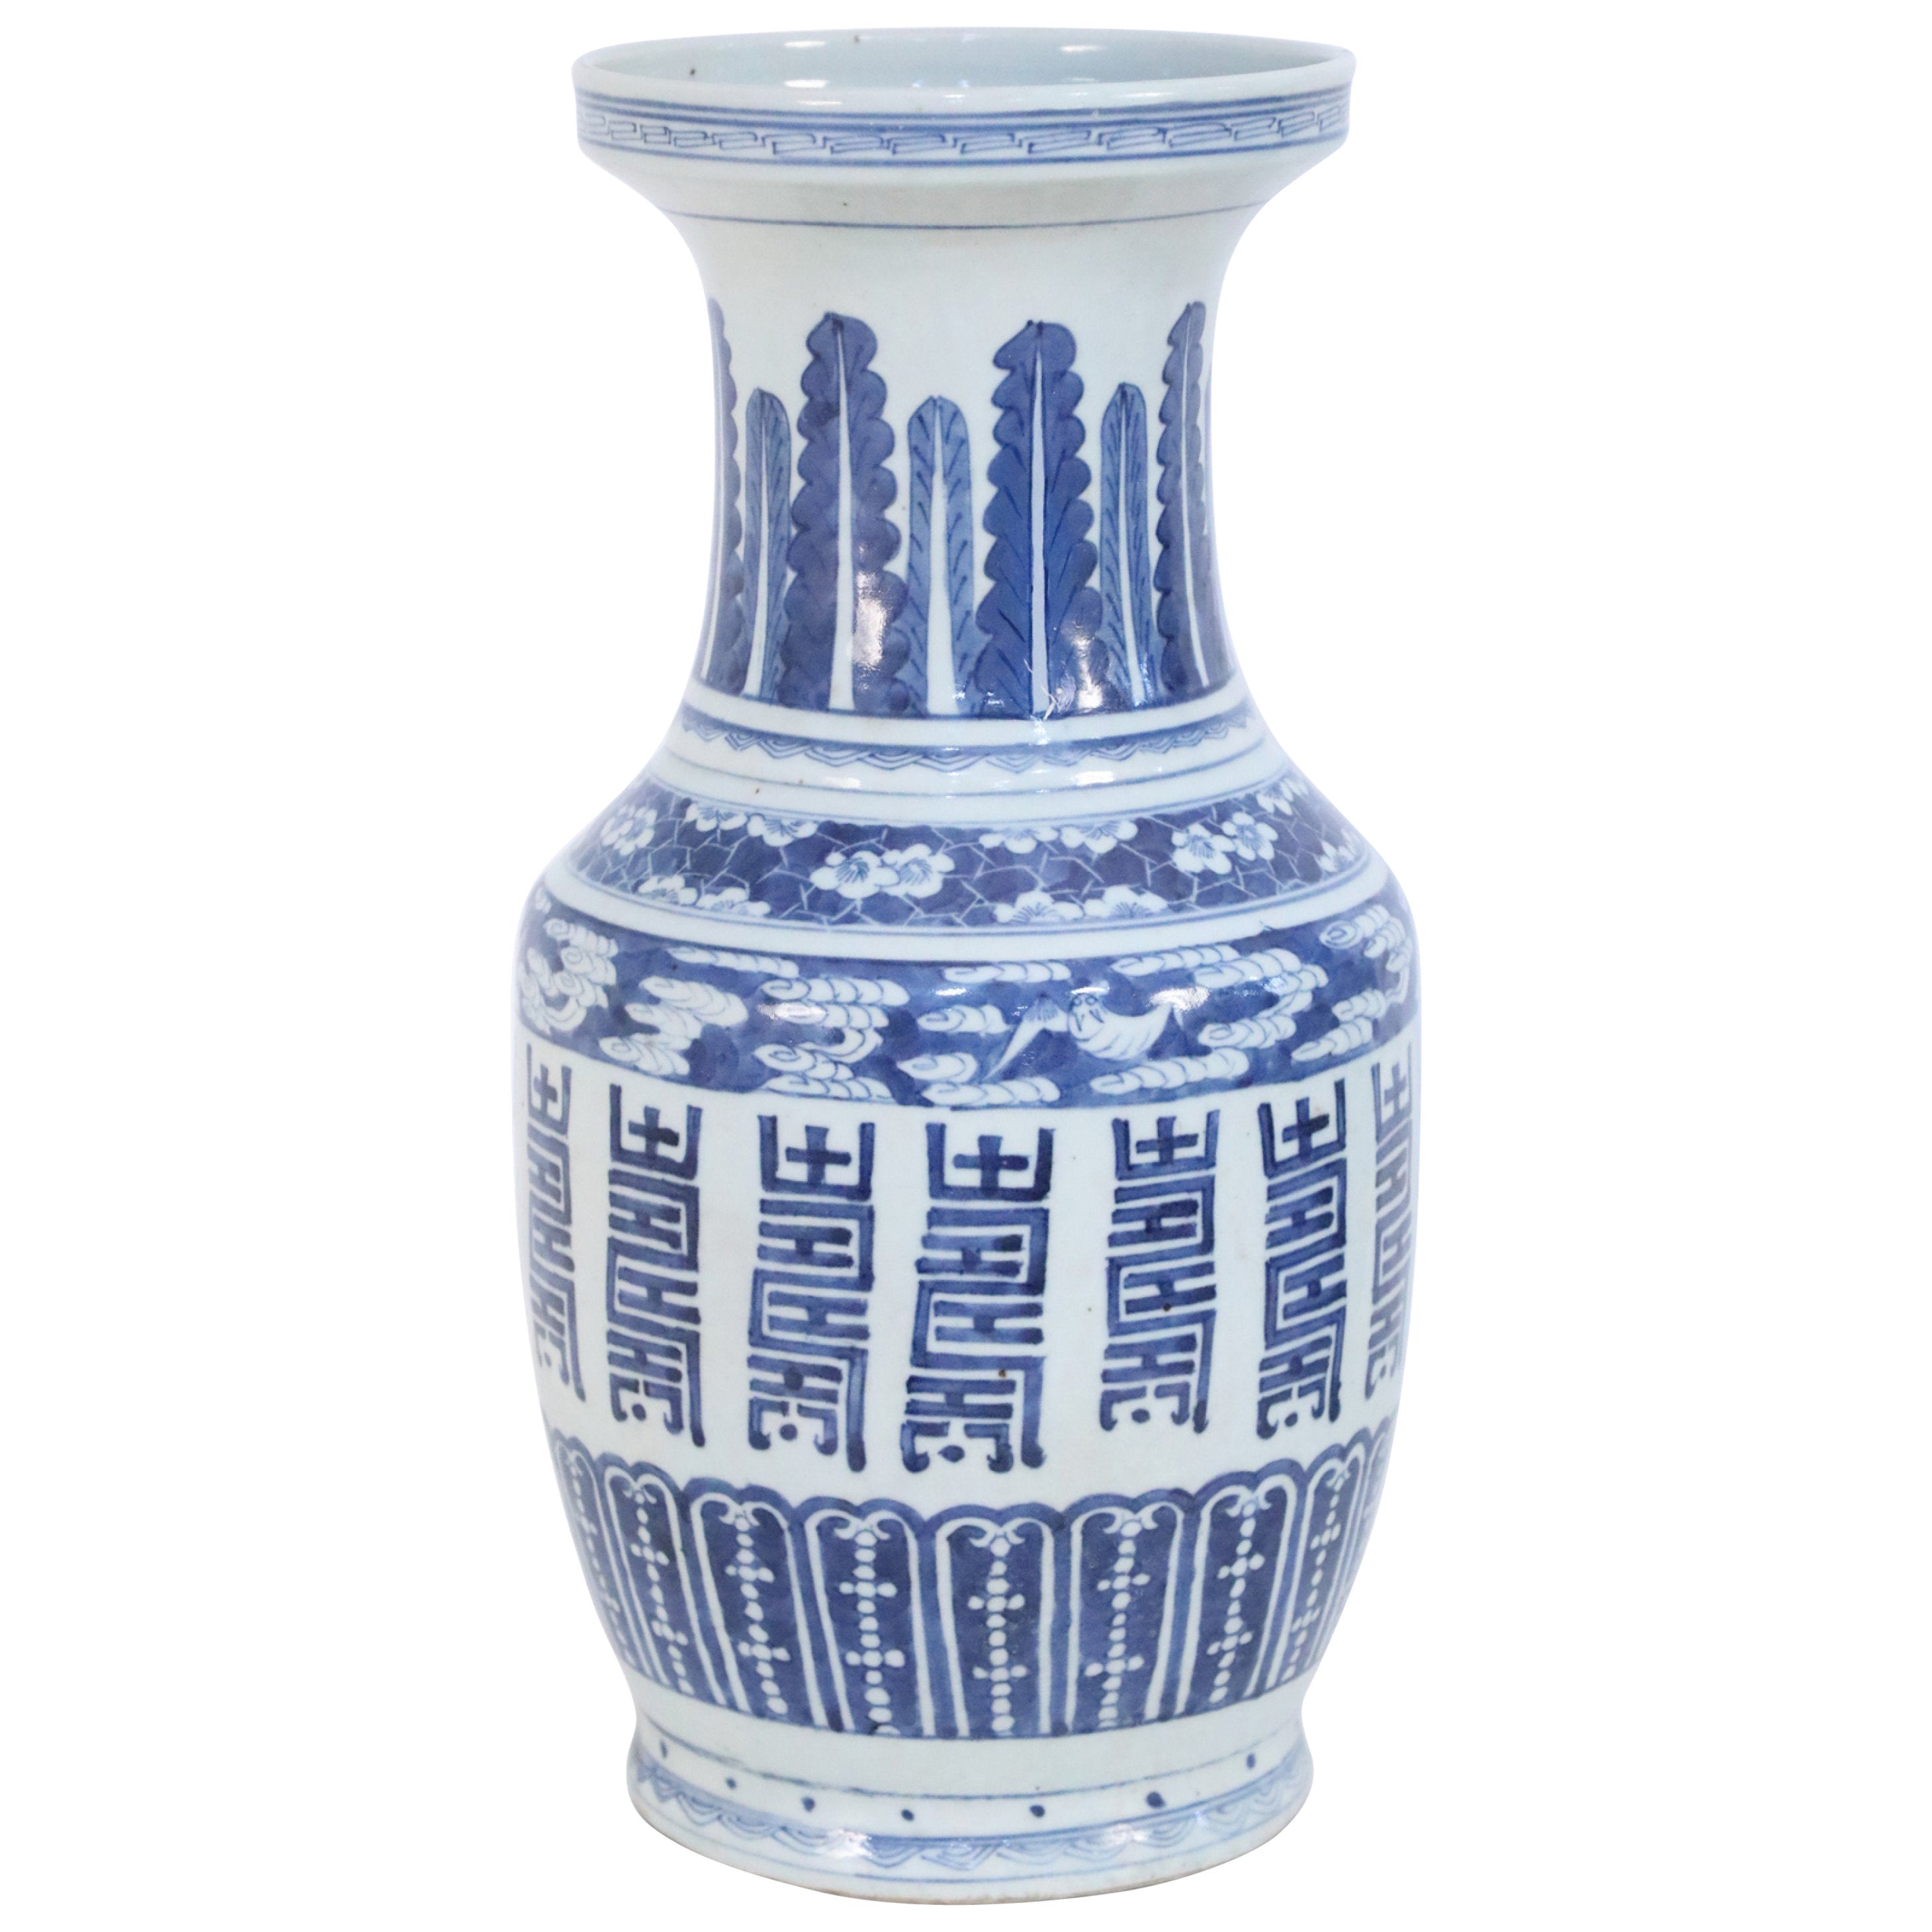 Chinese White and Blue Multi-Pattern Porcelain Urn